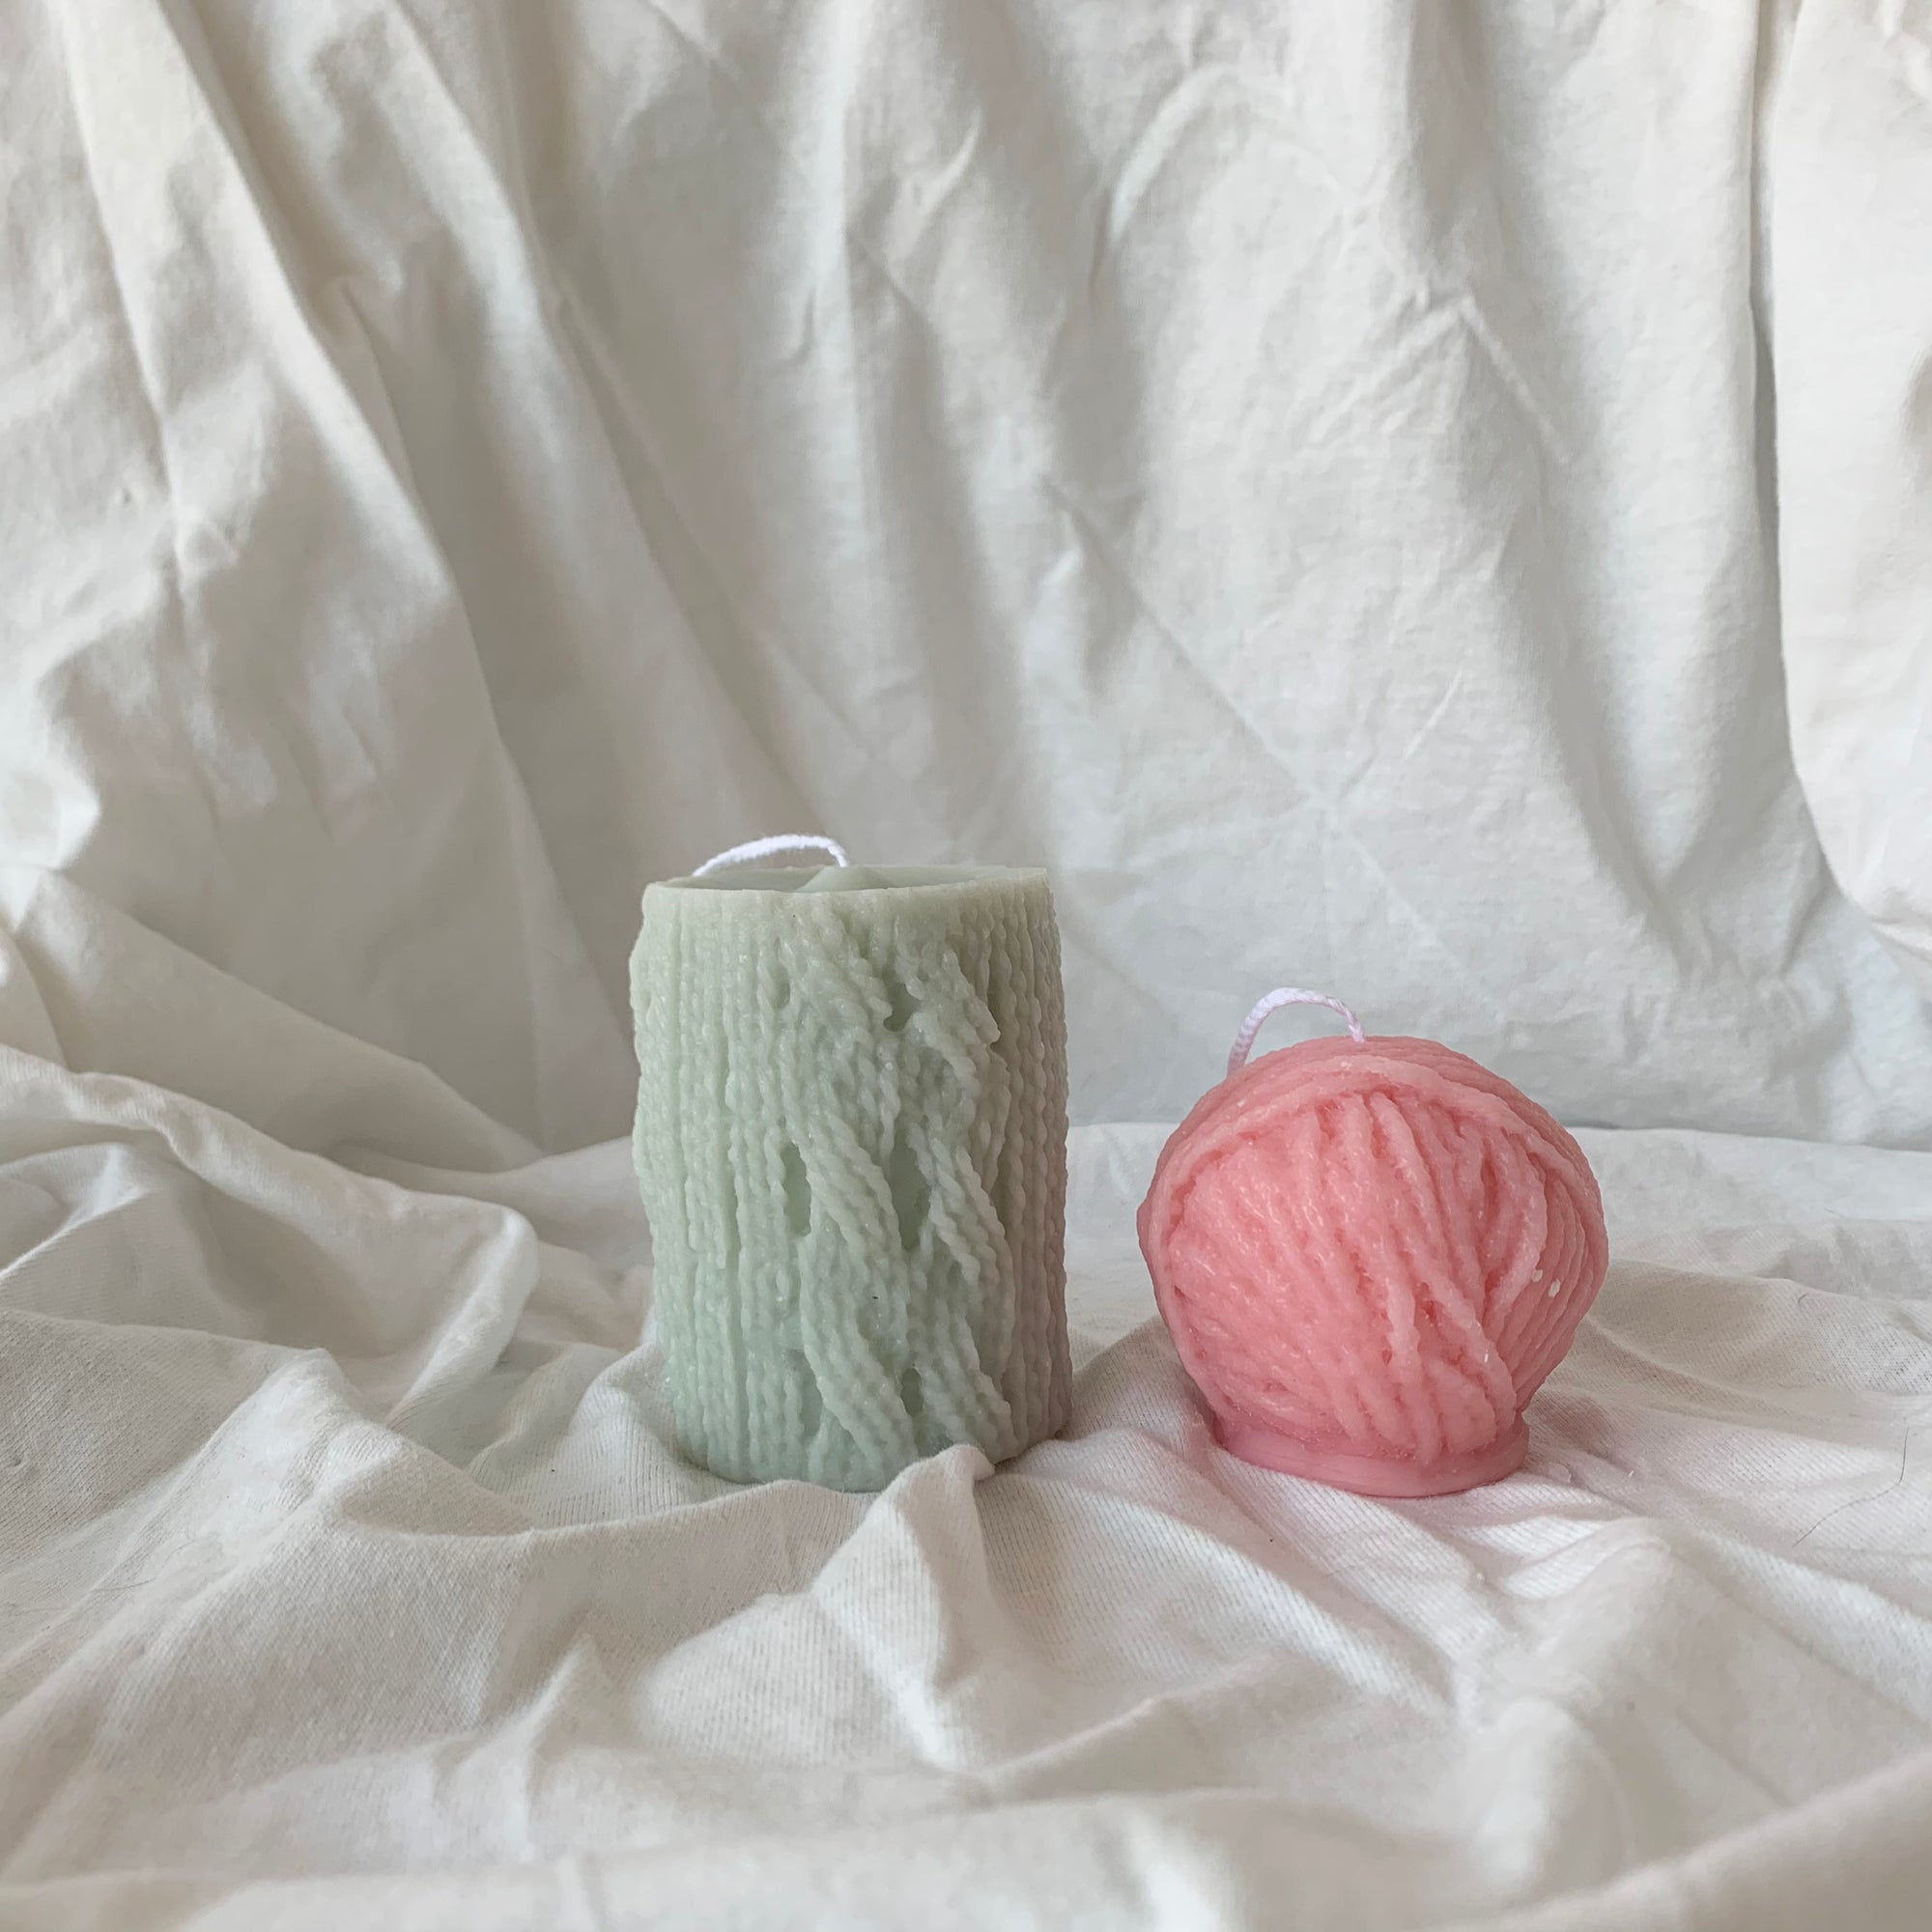 Colorful Yarn Ball Candle & Knitted Candle│ Kawaii Candle